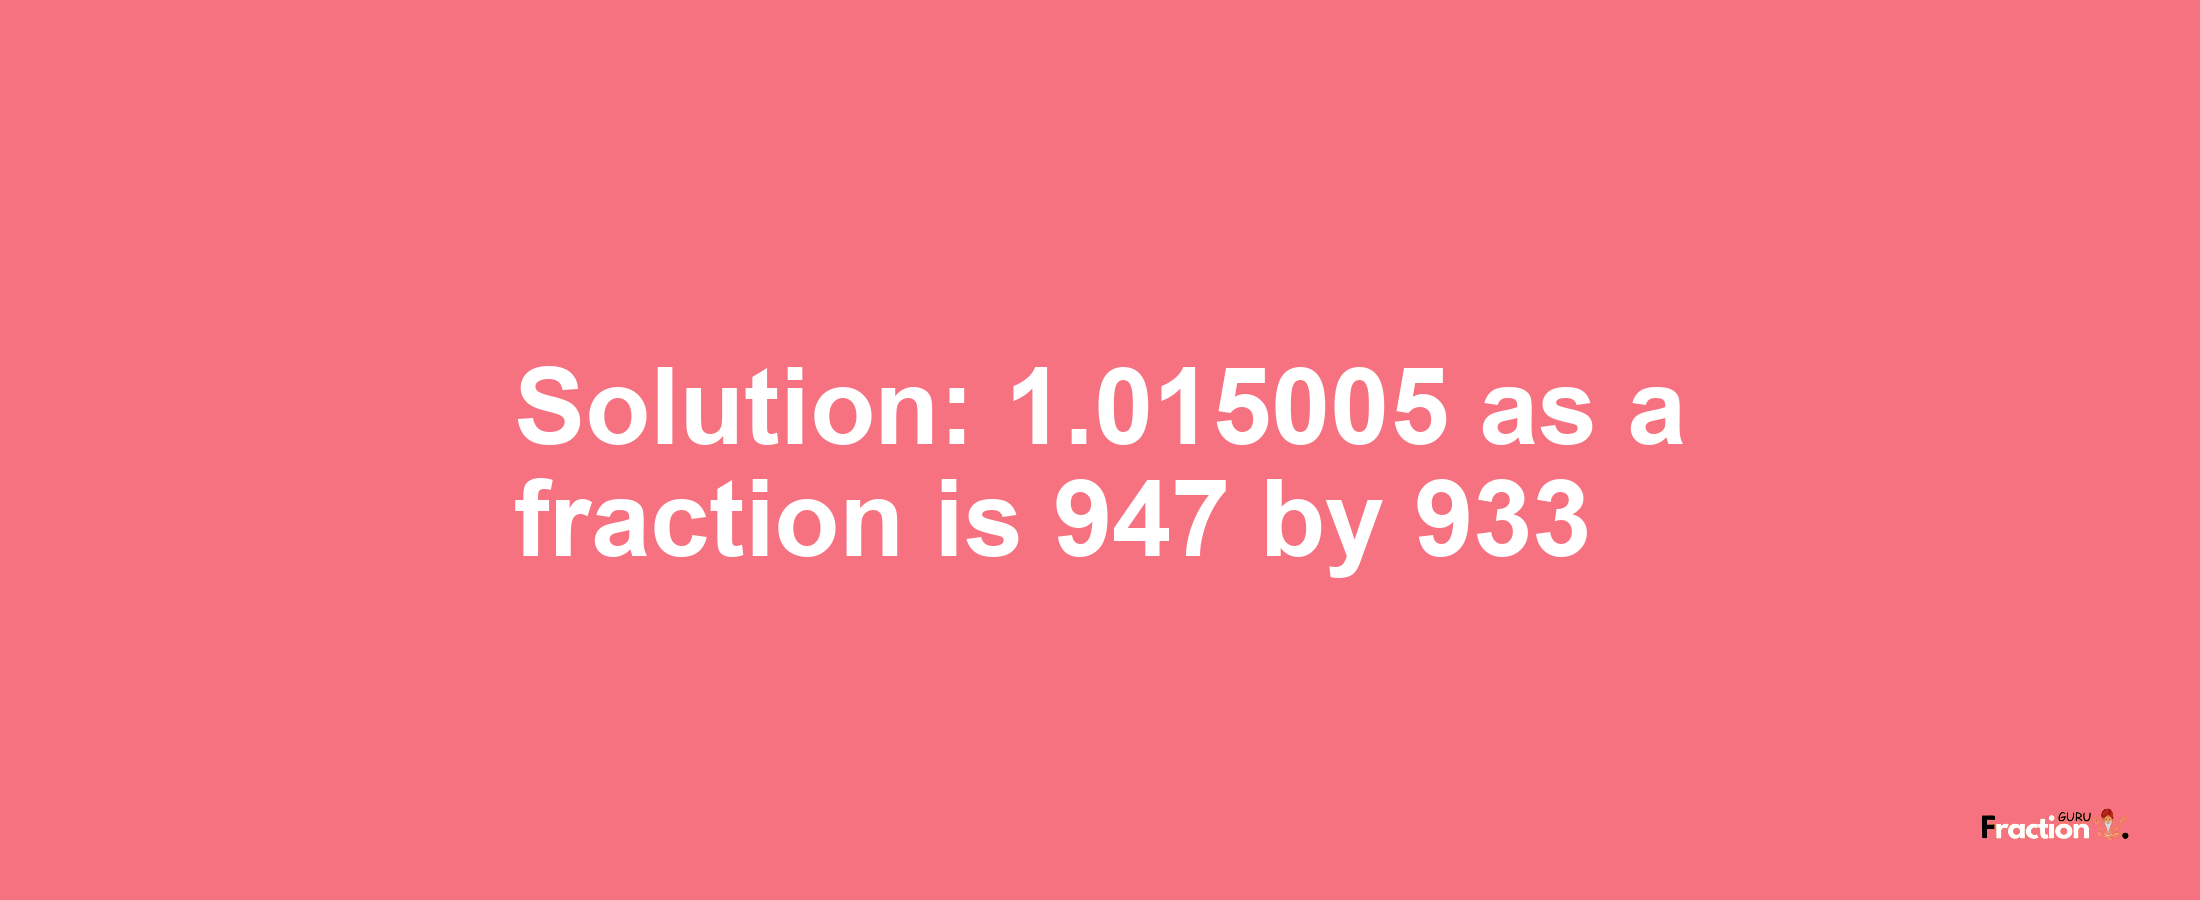 Solution:1.015005 as a fraction is 947/933